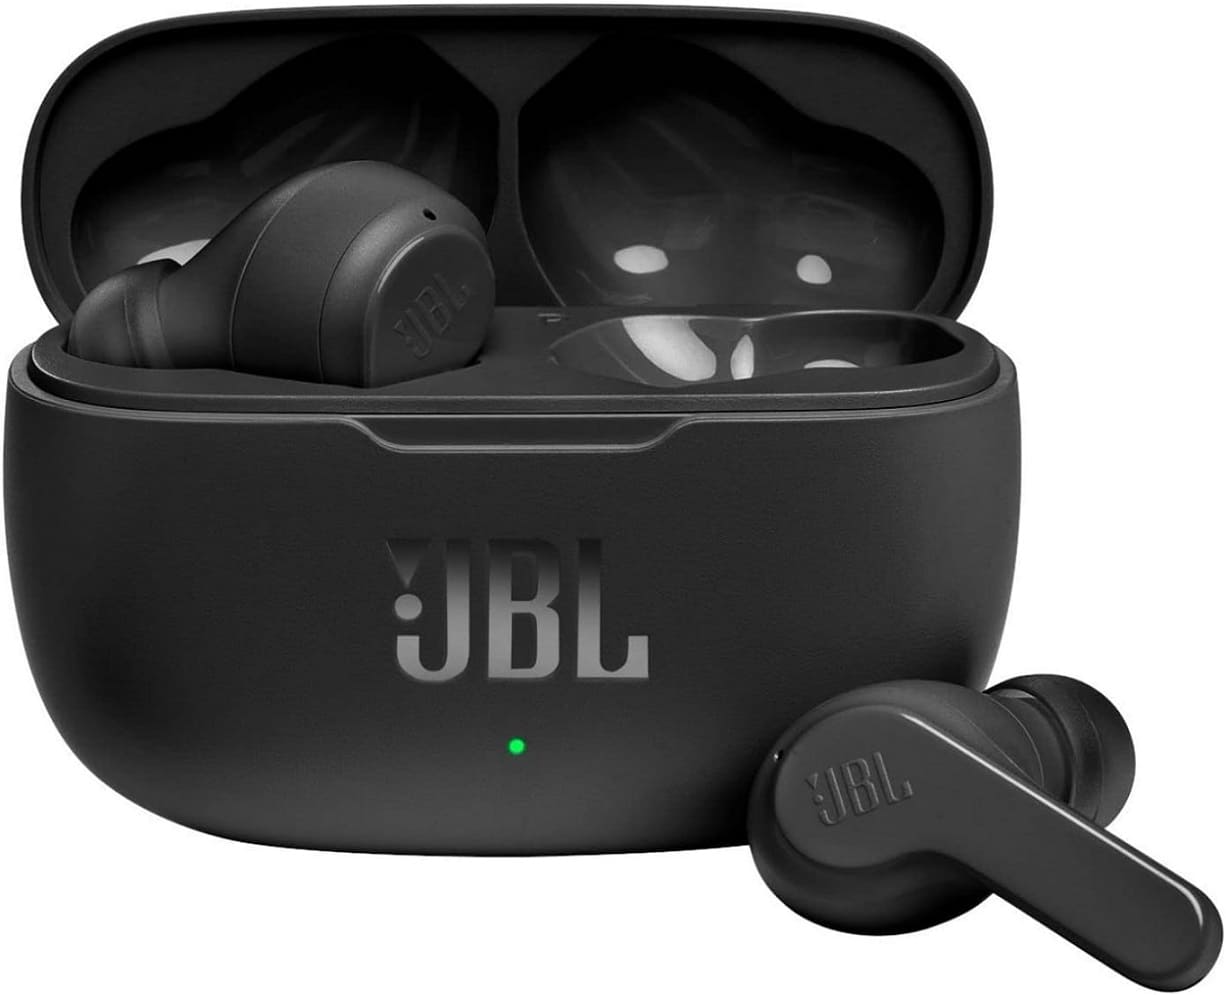 How to turn on or off JBL Vibe 200 Earbuds?